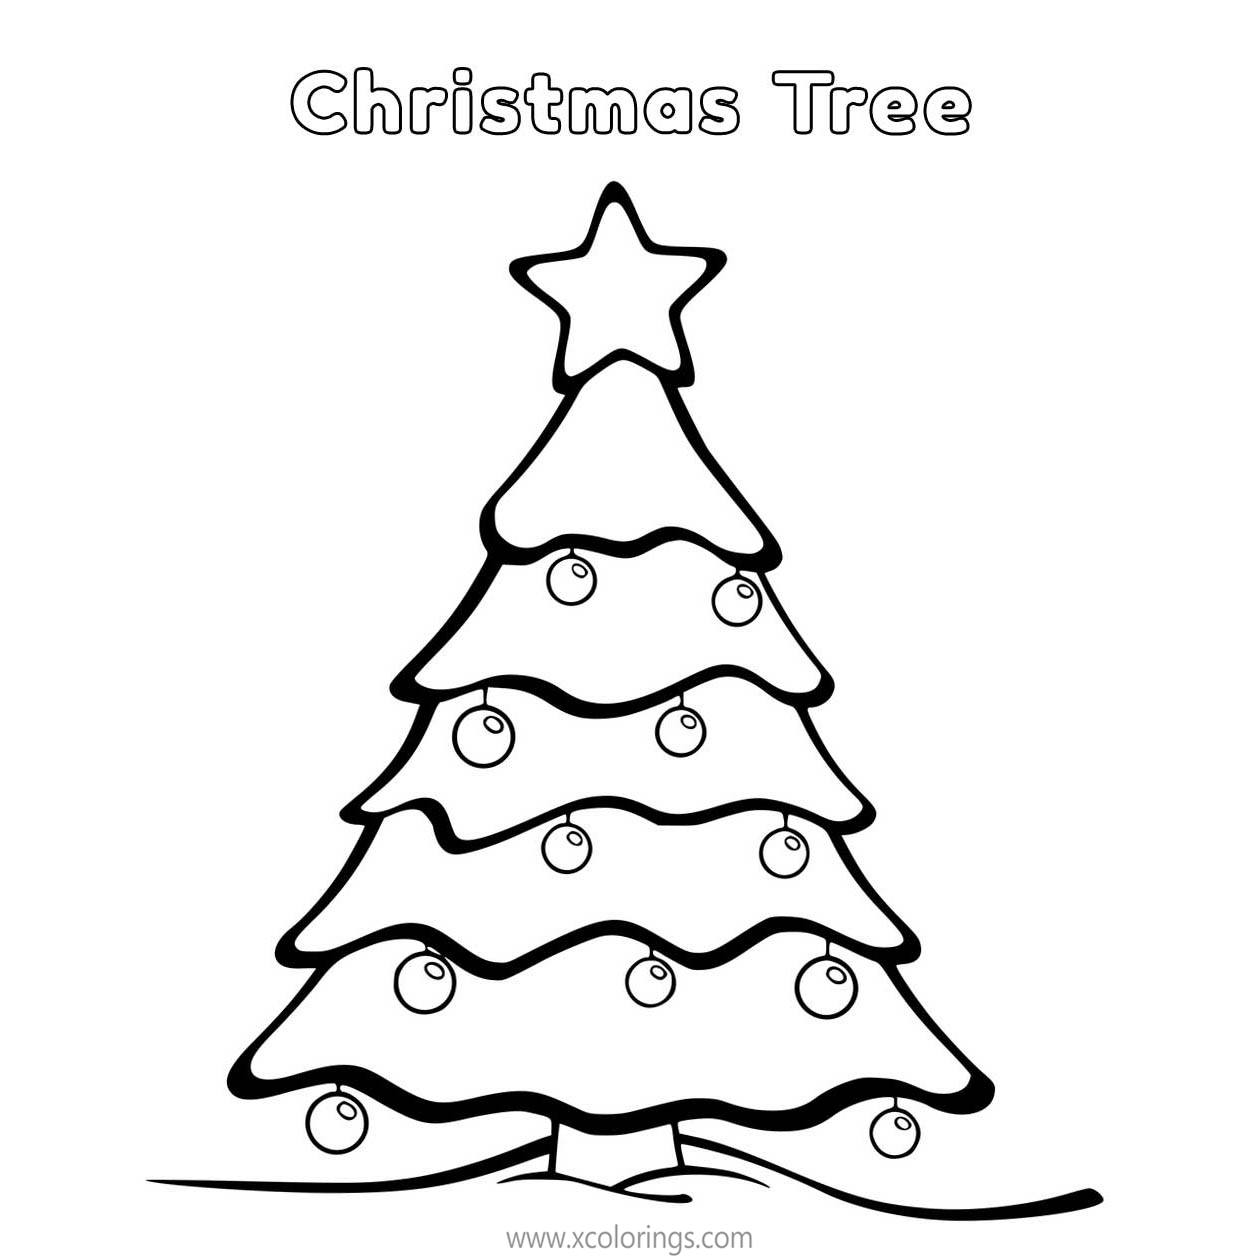 Free Classic Christmas Tree Coloring Pages printable